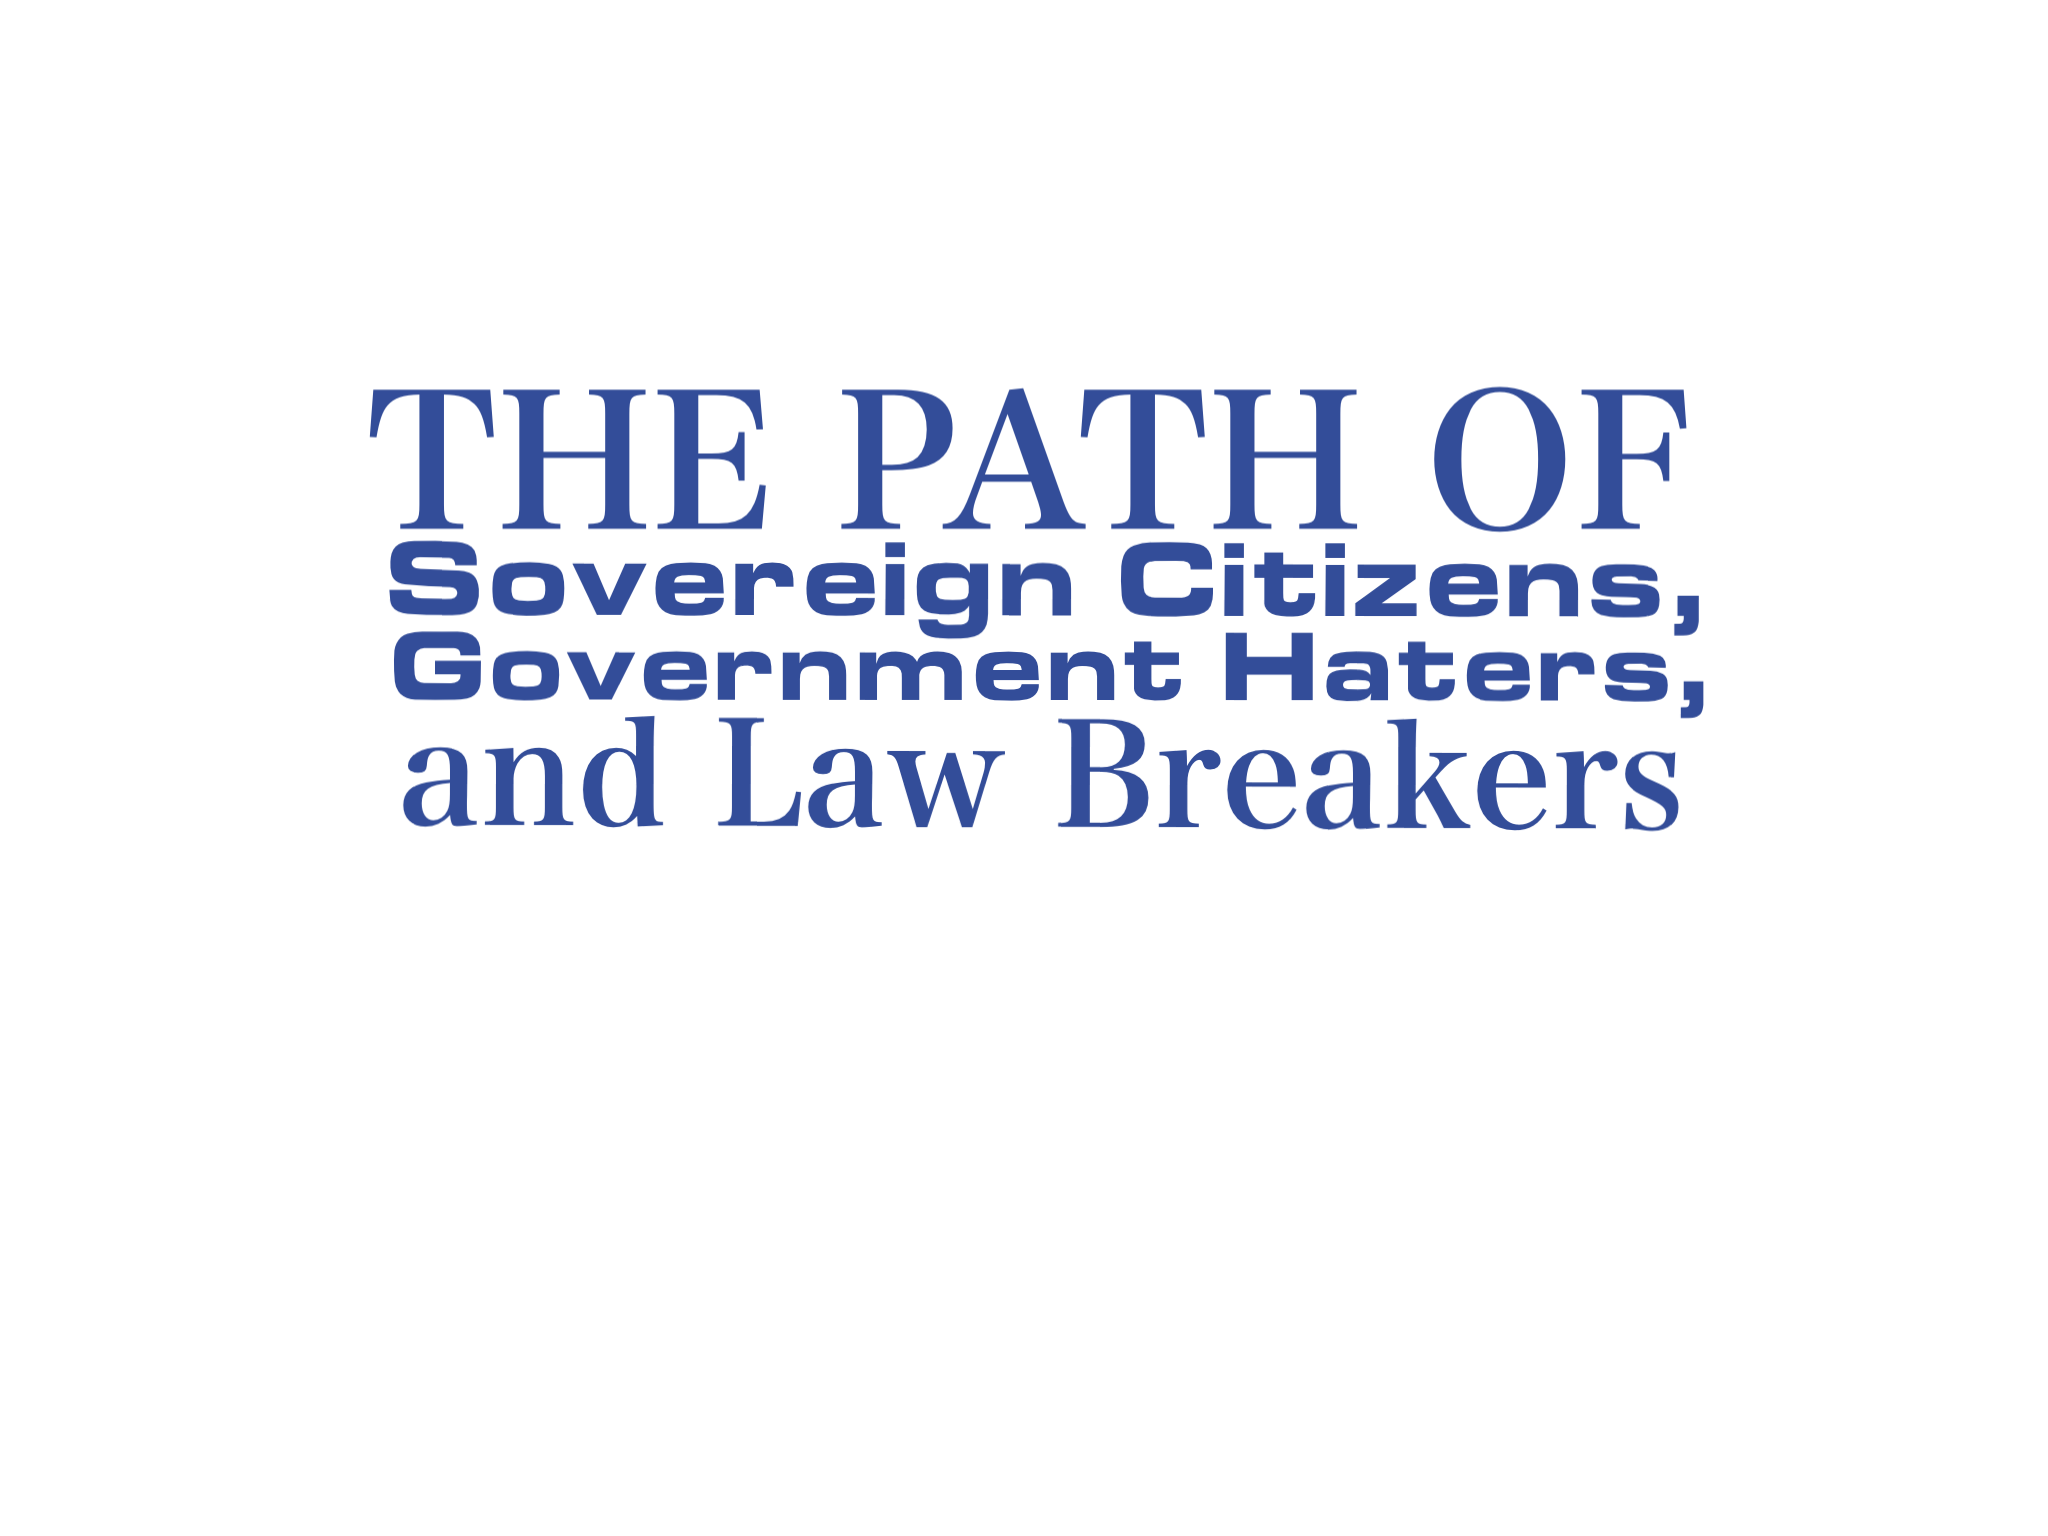 The Path of Sovereign Citizens, Government Haters, and Law Breakers